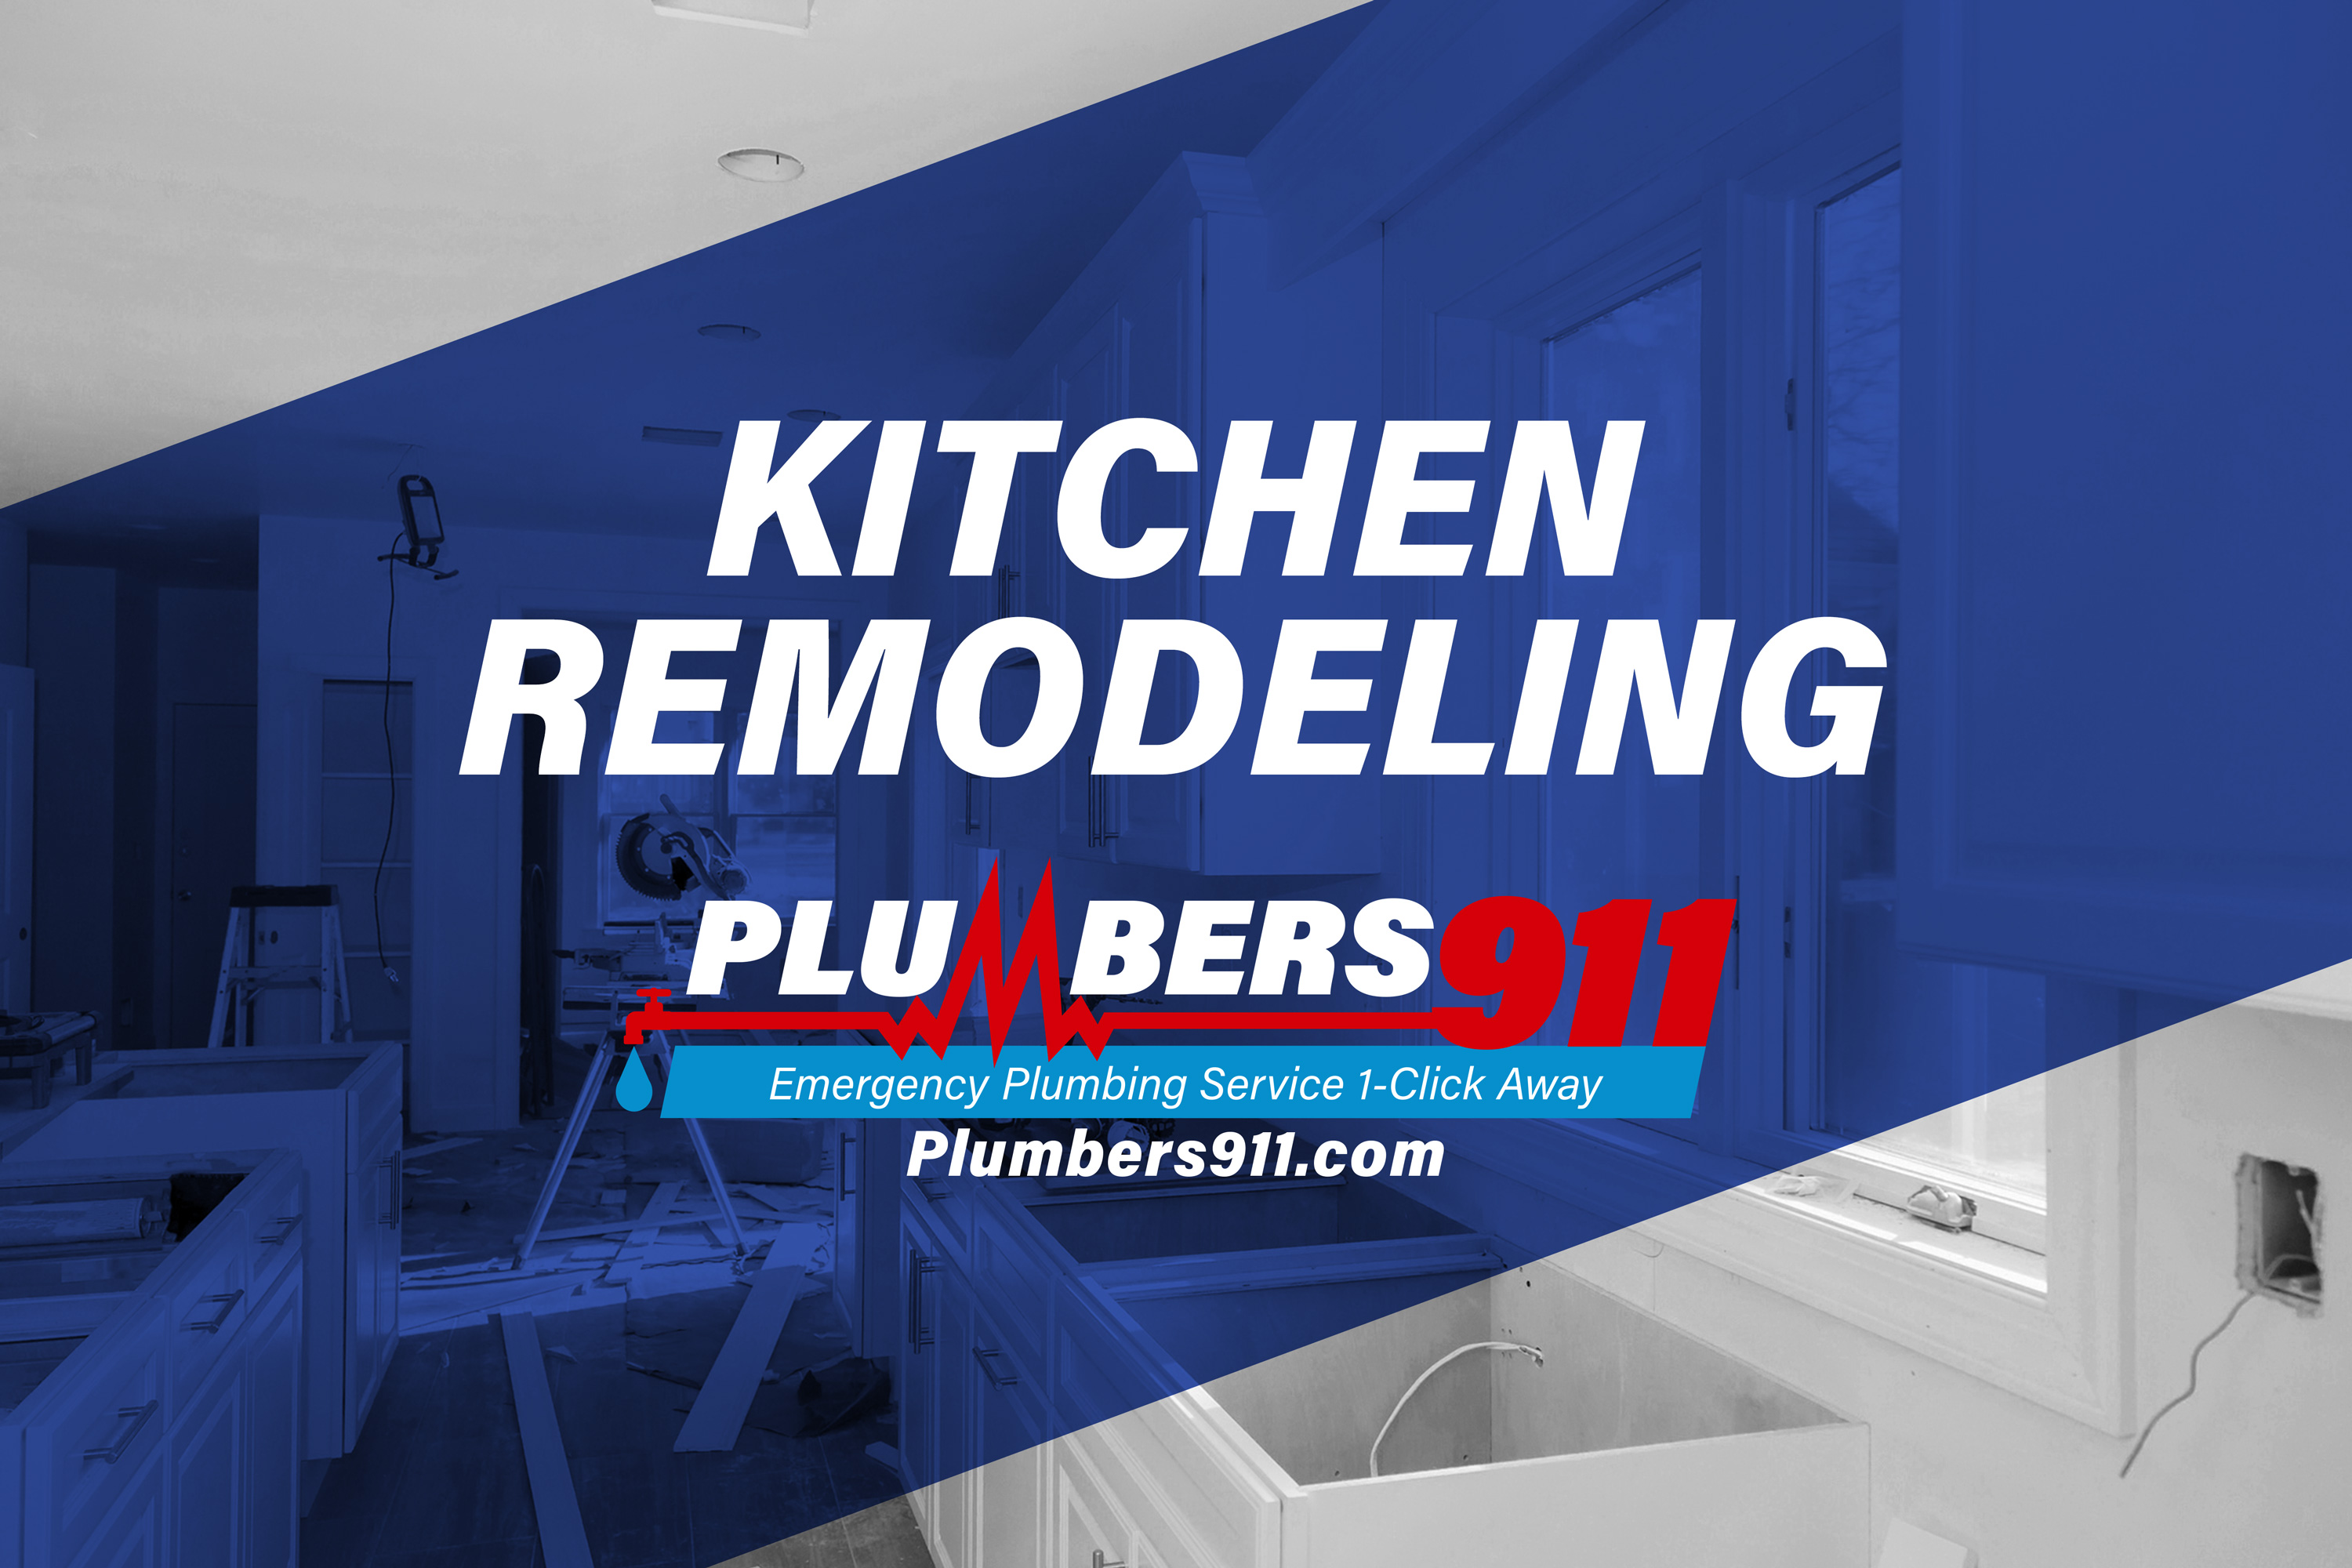 Plumbers 911 - Additional Plumbing Services - Kitchen Remodeling